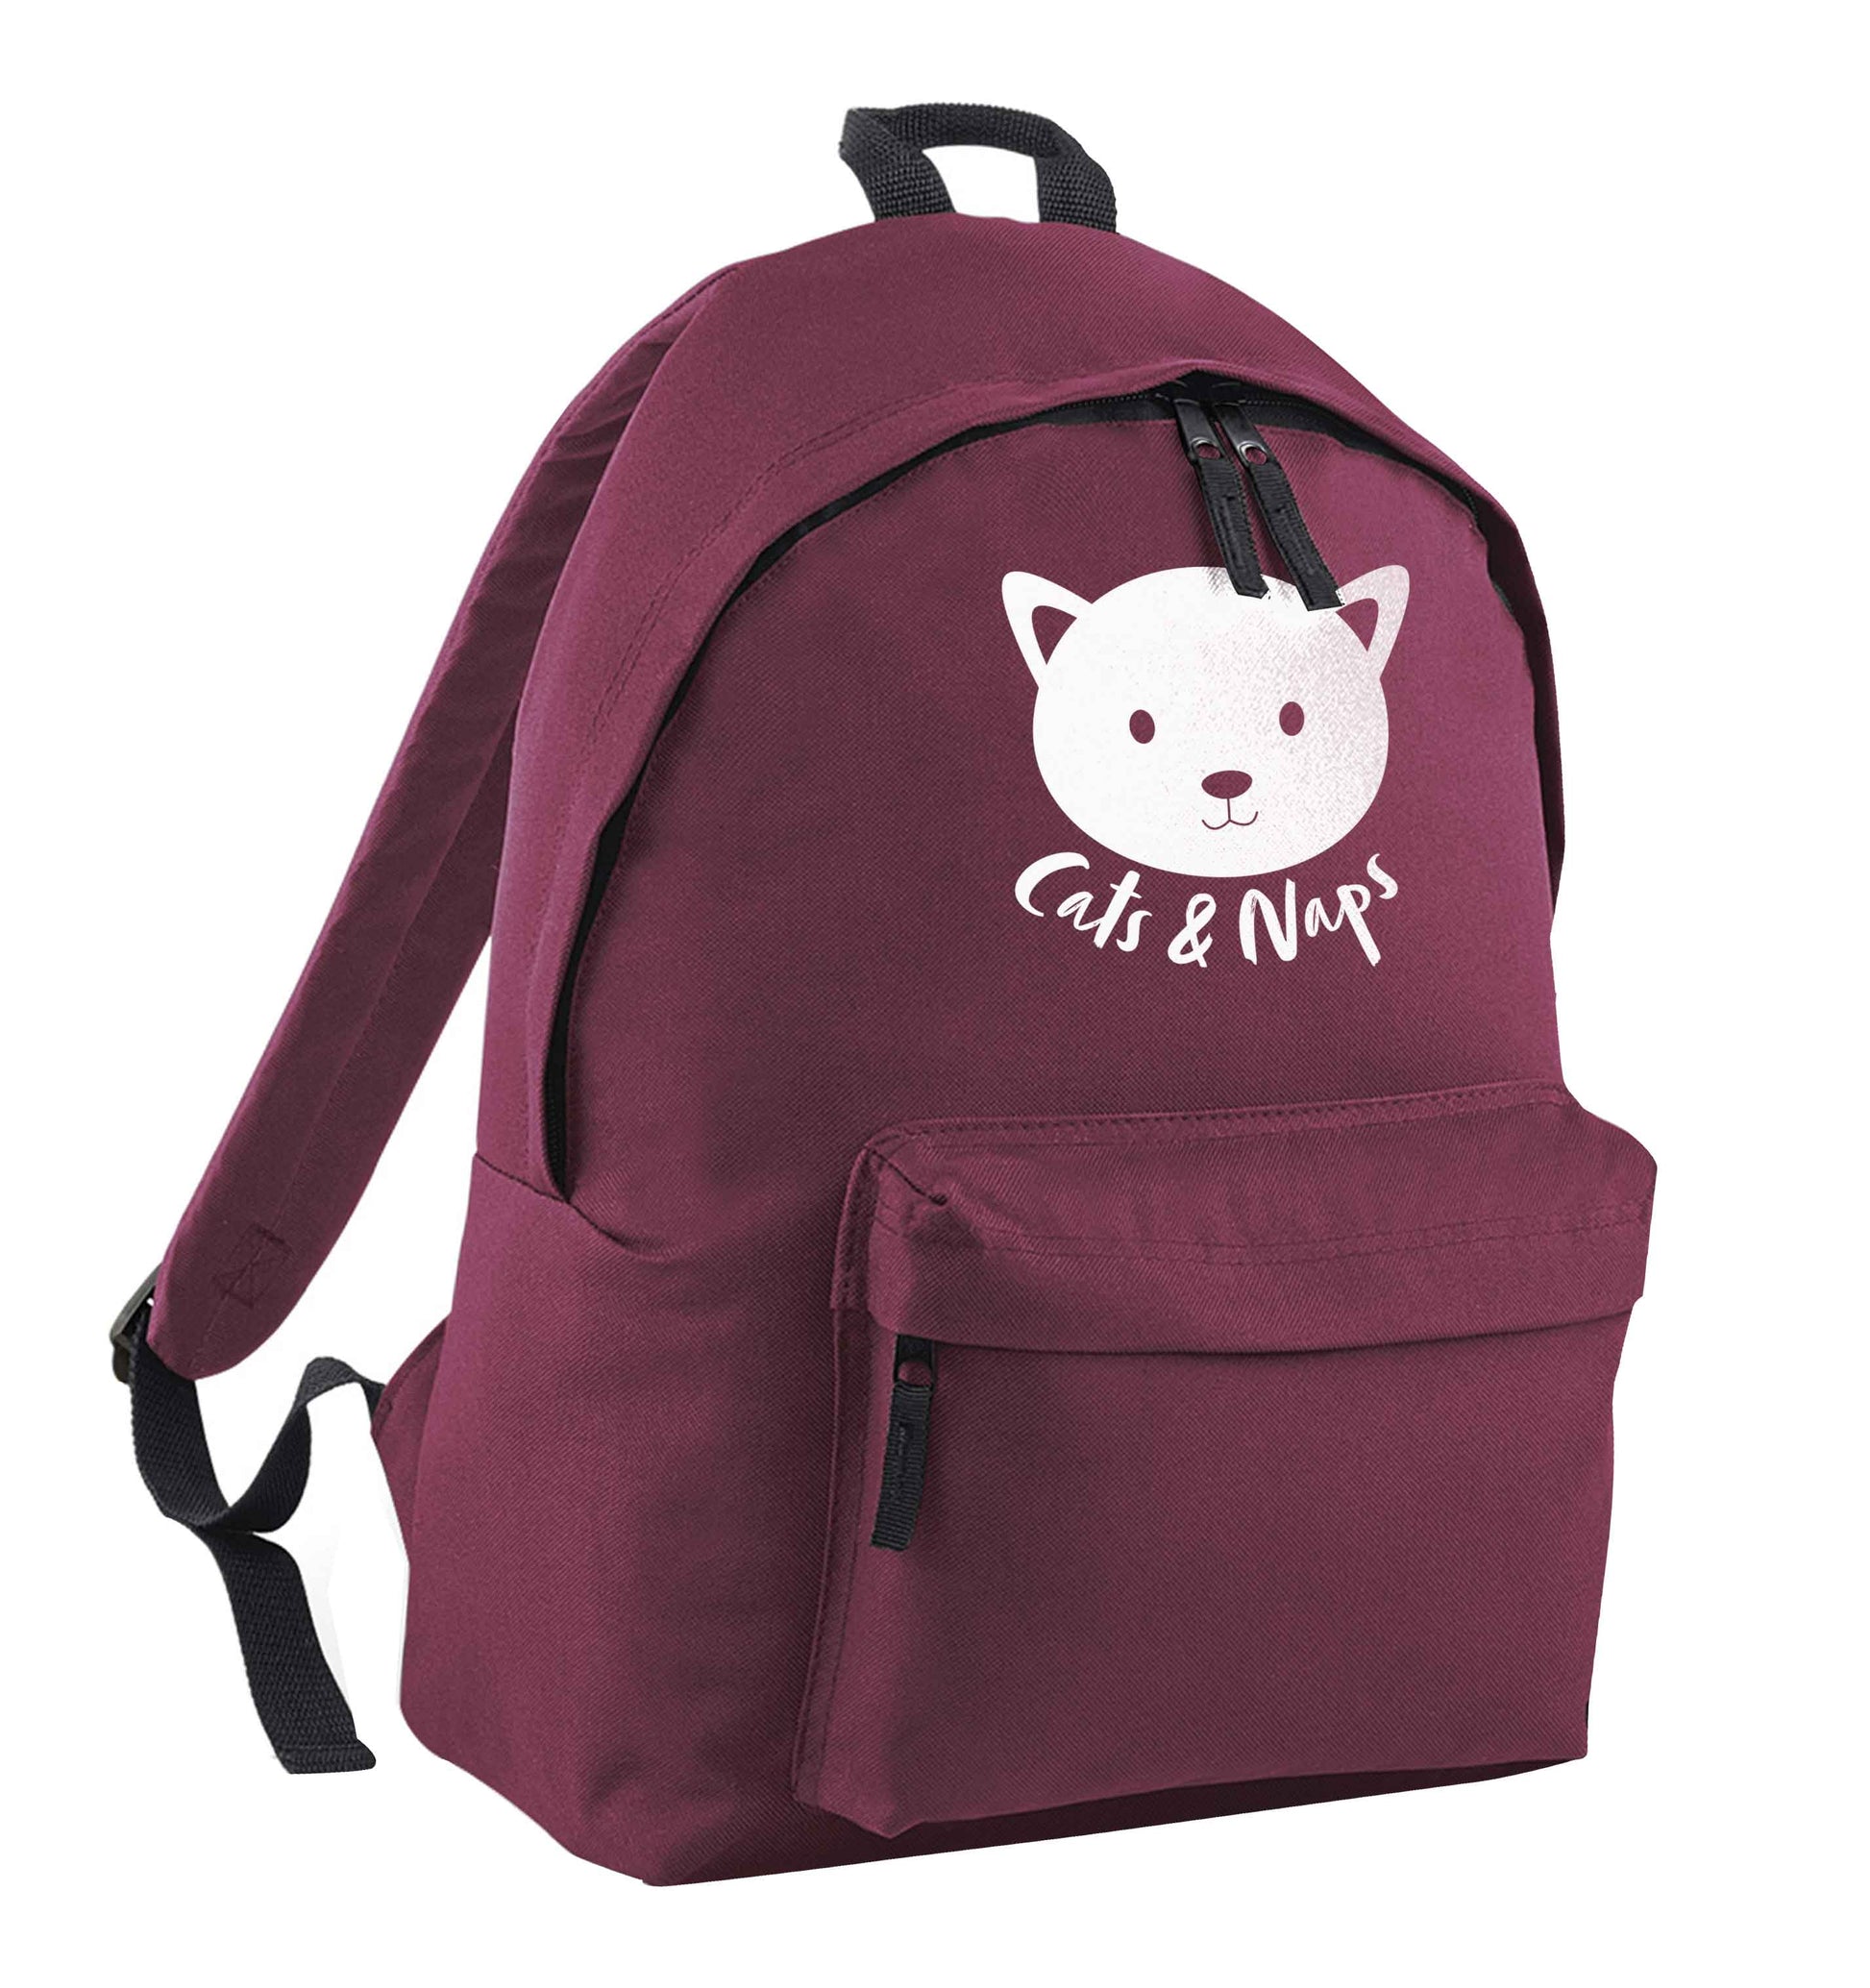 Cats and naps Kit maroon children's backpack